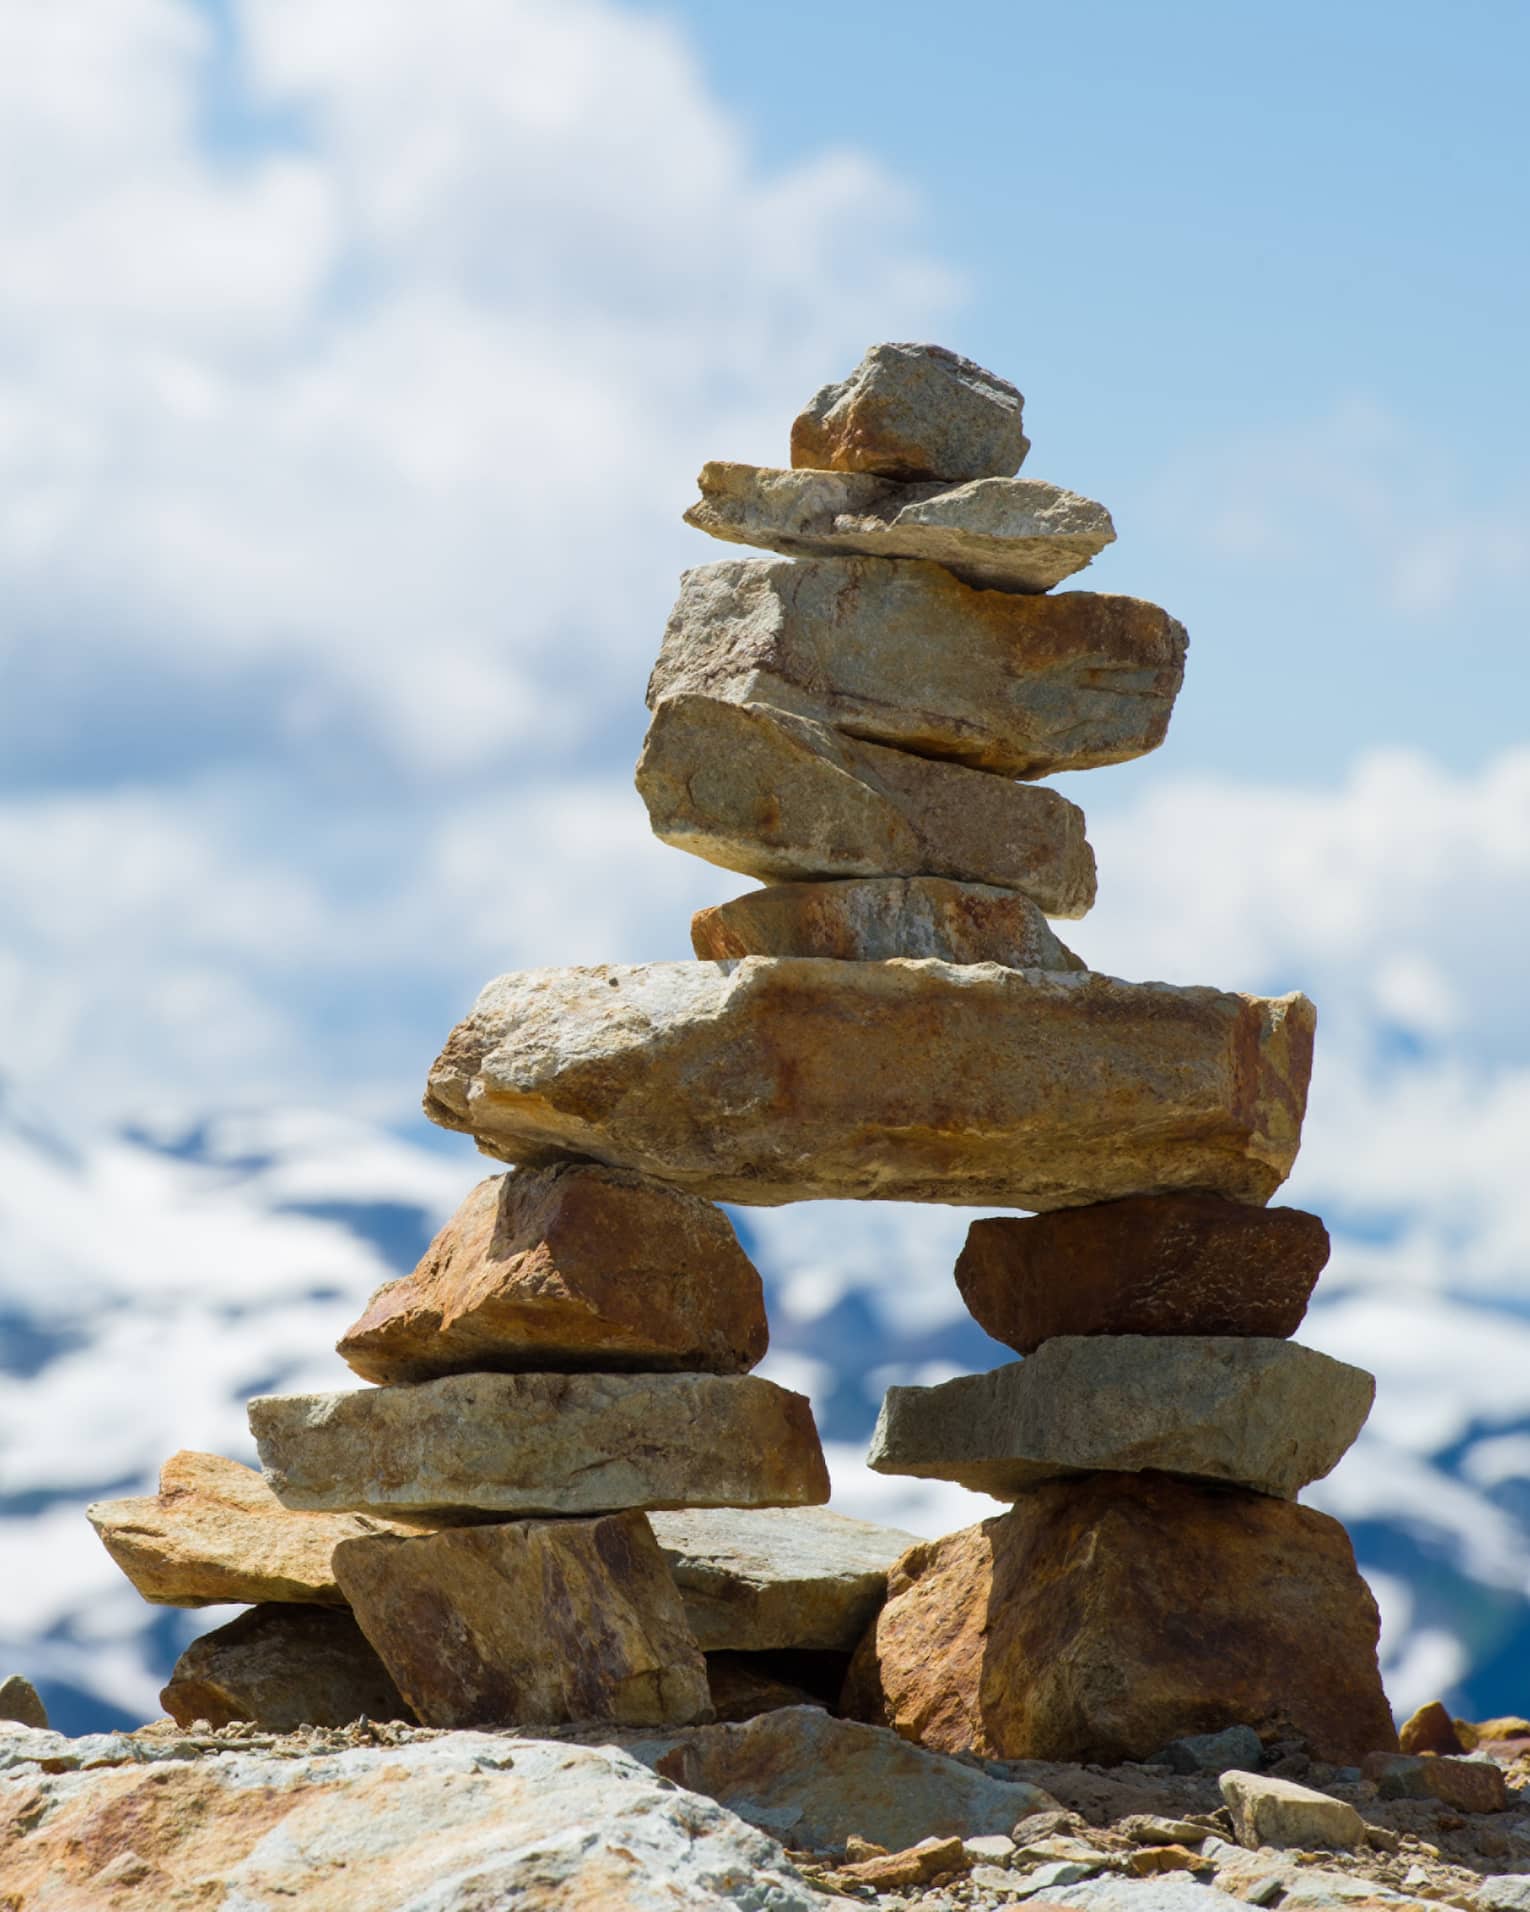 Close-up of an inukshuk atop a high rock shelf, against blue sky, white clouds and a majestic distant mountain.